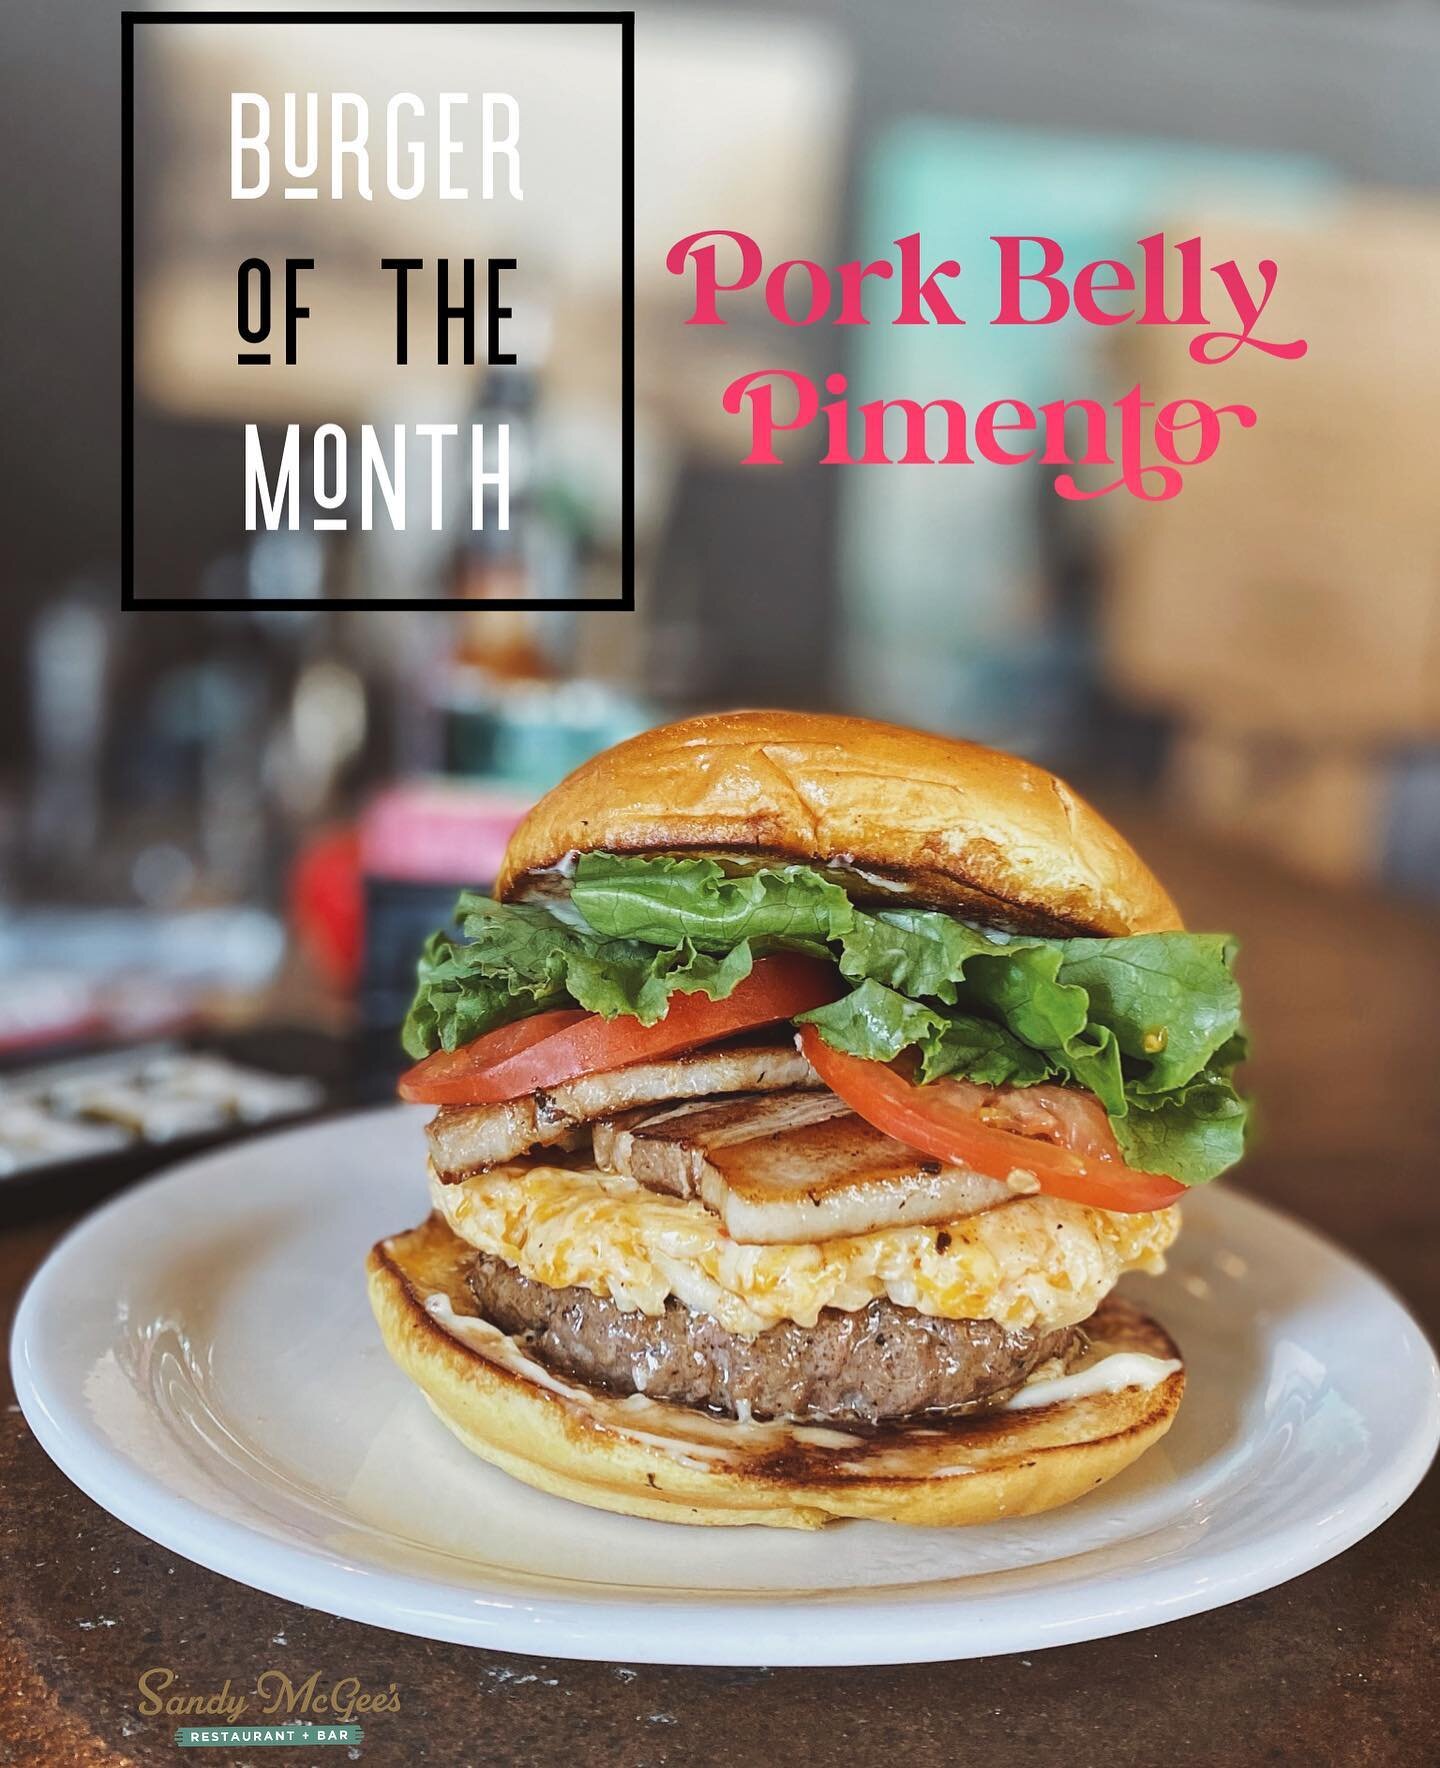 🚨 New Burger of the Month 🚨
🍔🐖🍔🐖🍔🐖🍔🐖🍔🐖🍔
The Pork Belly Pimento burger features a hand-formed, 1/2 lb beef patty, slow-cooked pork belly, house-made pimento cheese, and tangy bourbon glaze - all on a toasted bun with mayo, lettuce, tomato